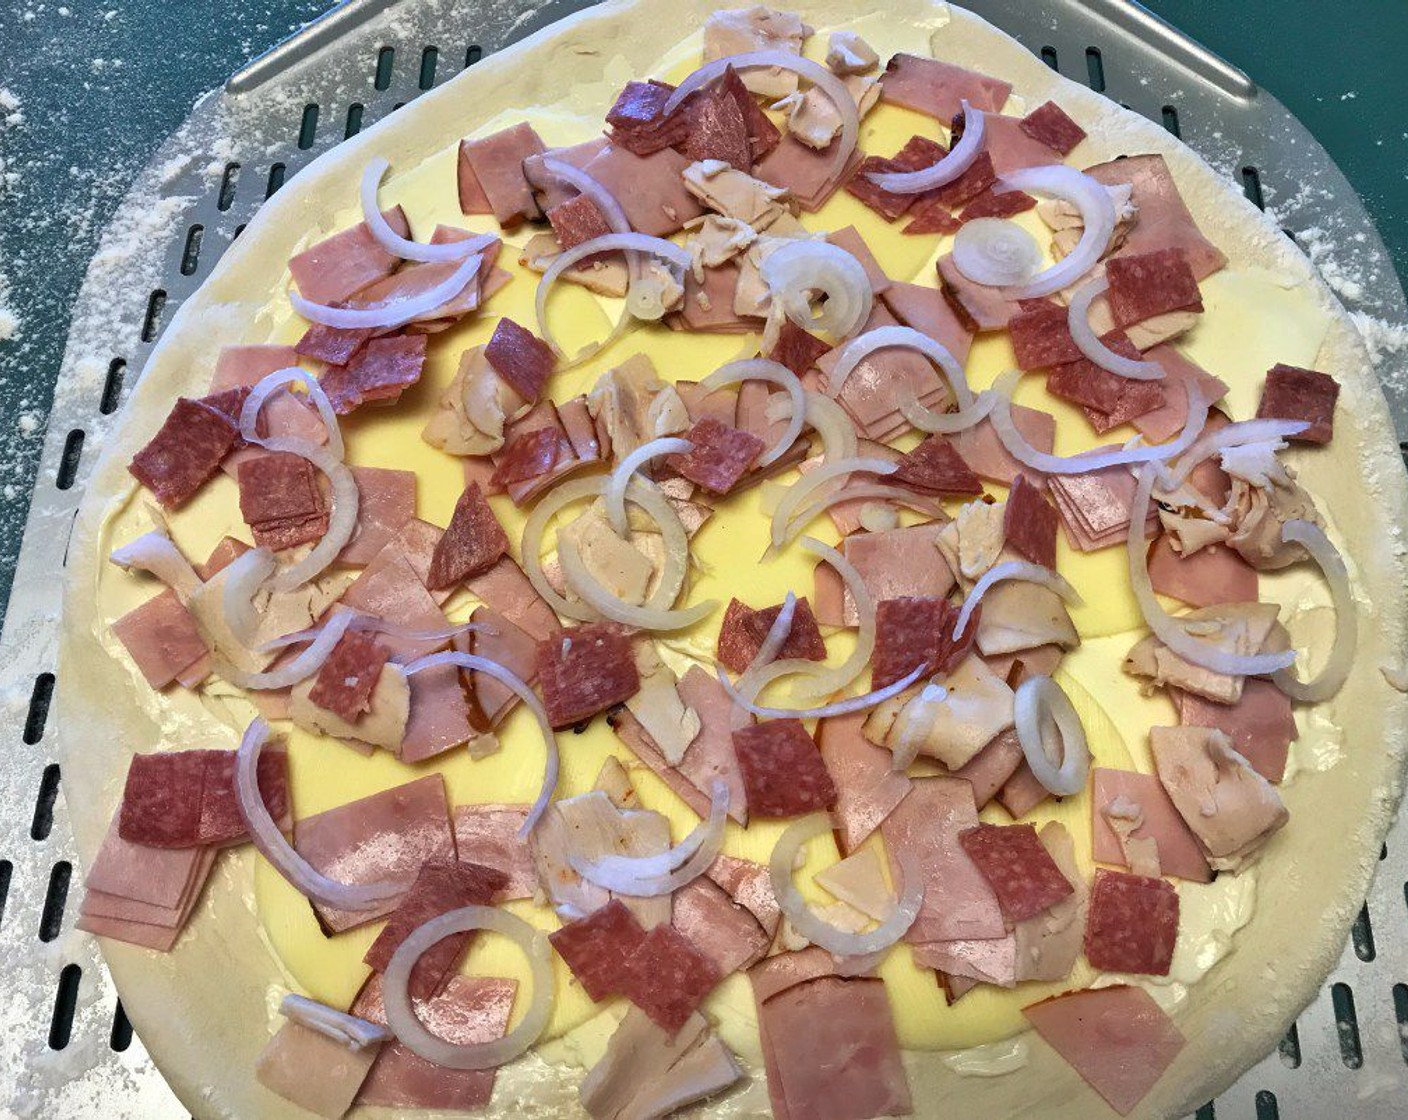 step 5 Top pizza with Deli Turkey (1/2 cup), Ham (3/4 cup), Salami (1/3 cup), and Onion (1).